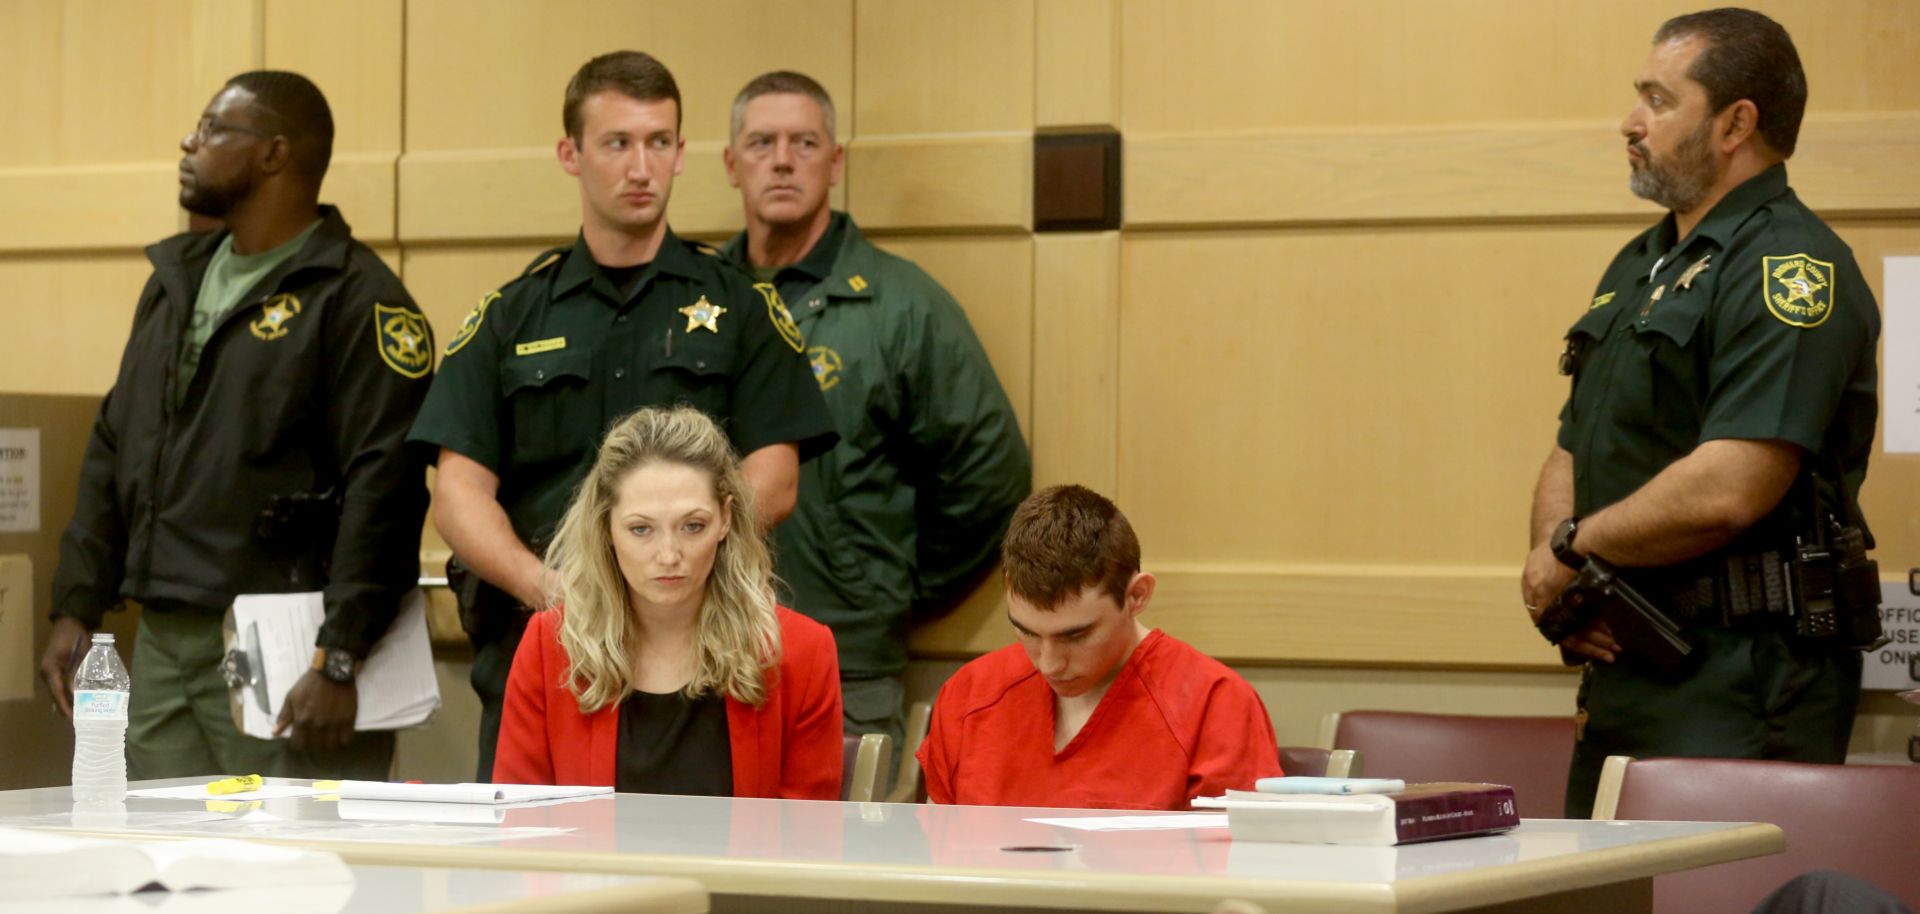 Nikolas Cruz sits in court during a hearing. He is charged with killing 17 people in a school shooting on Feb. 14.